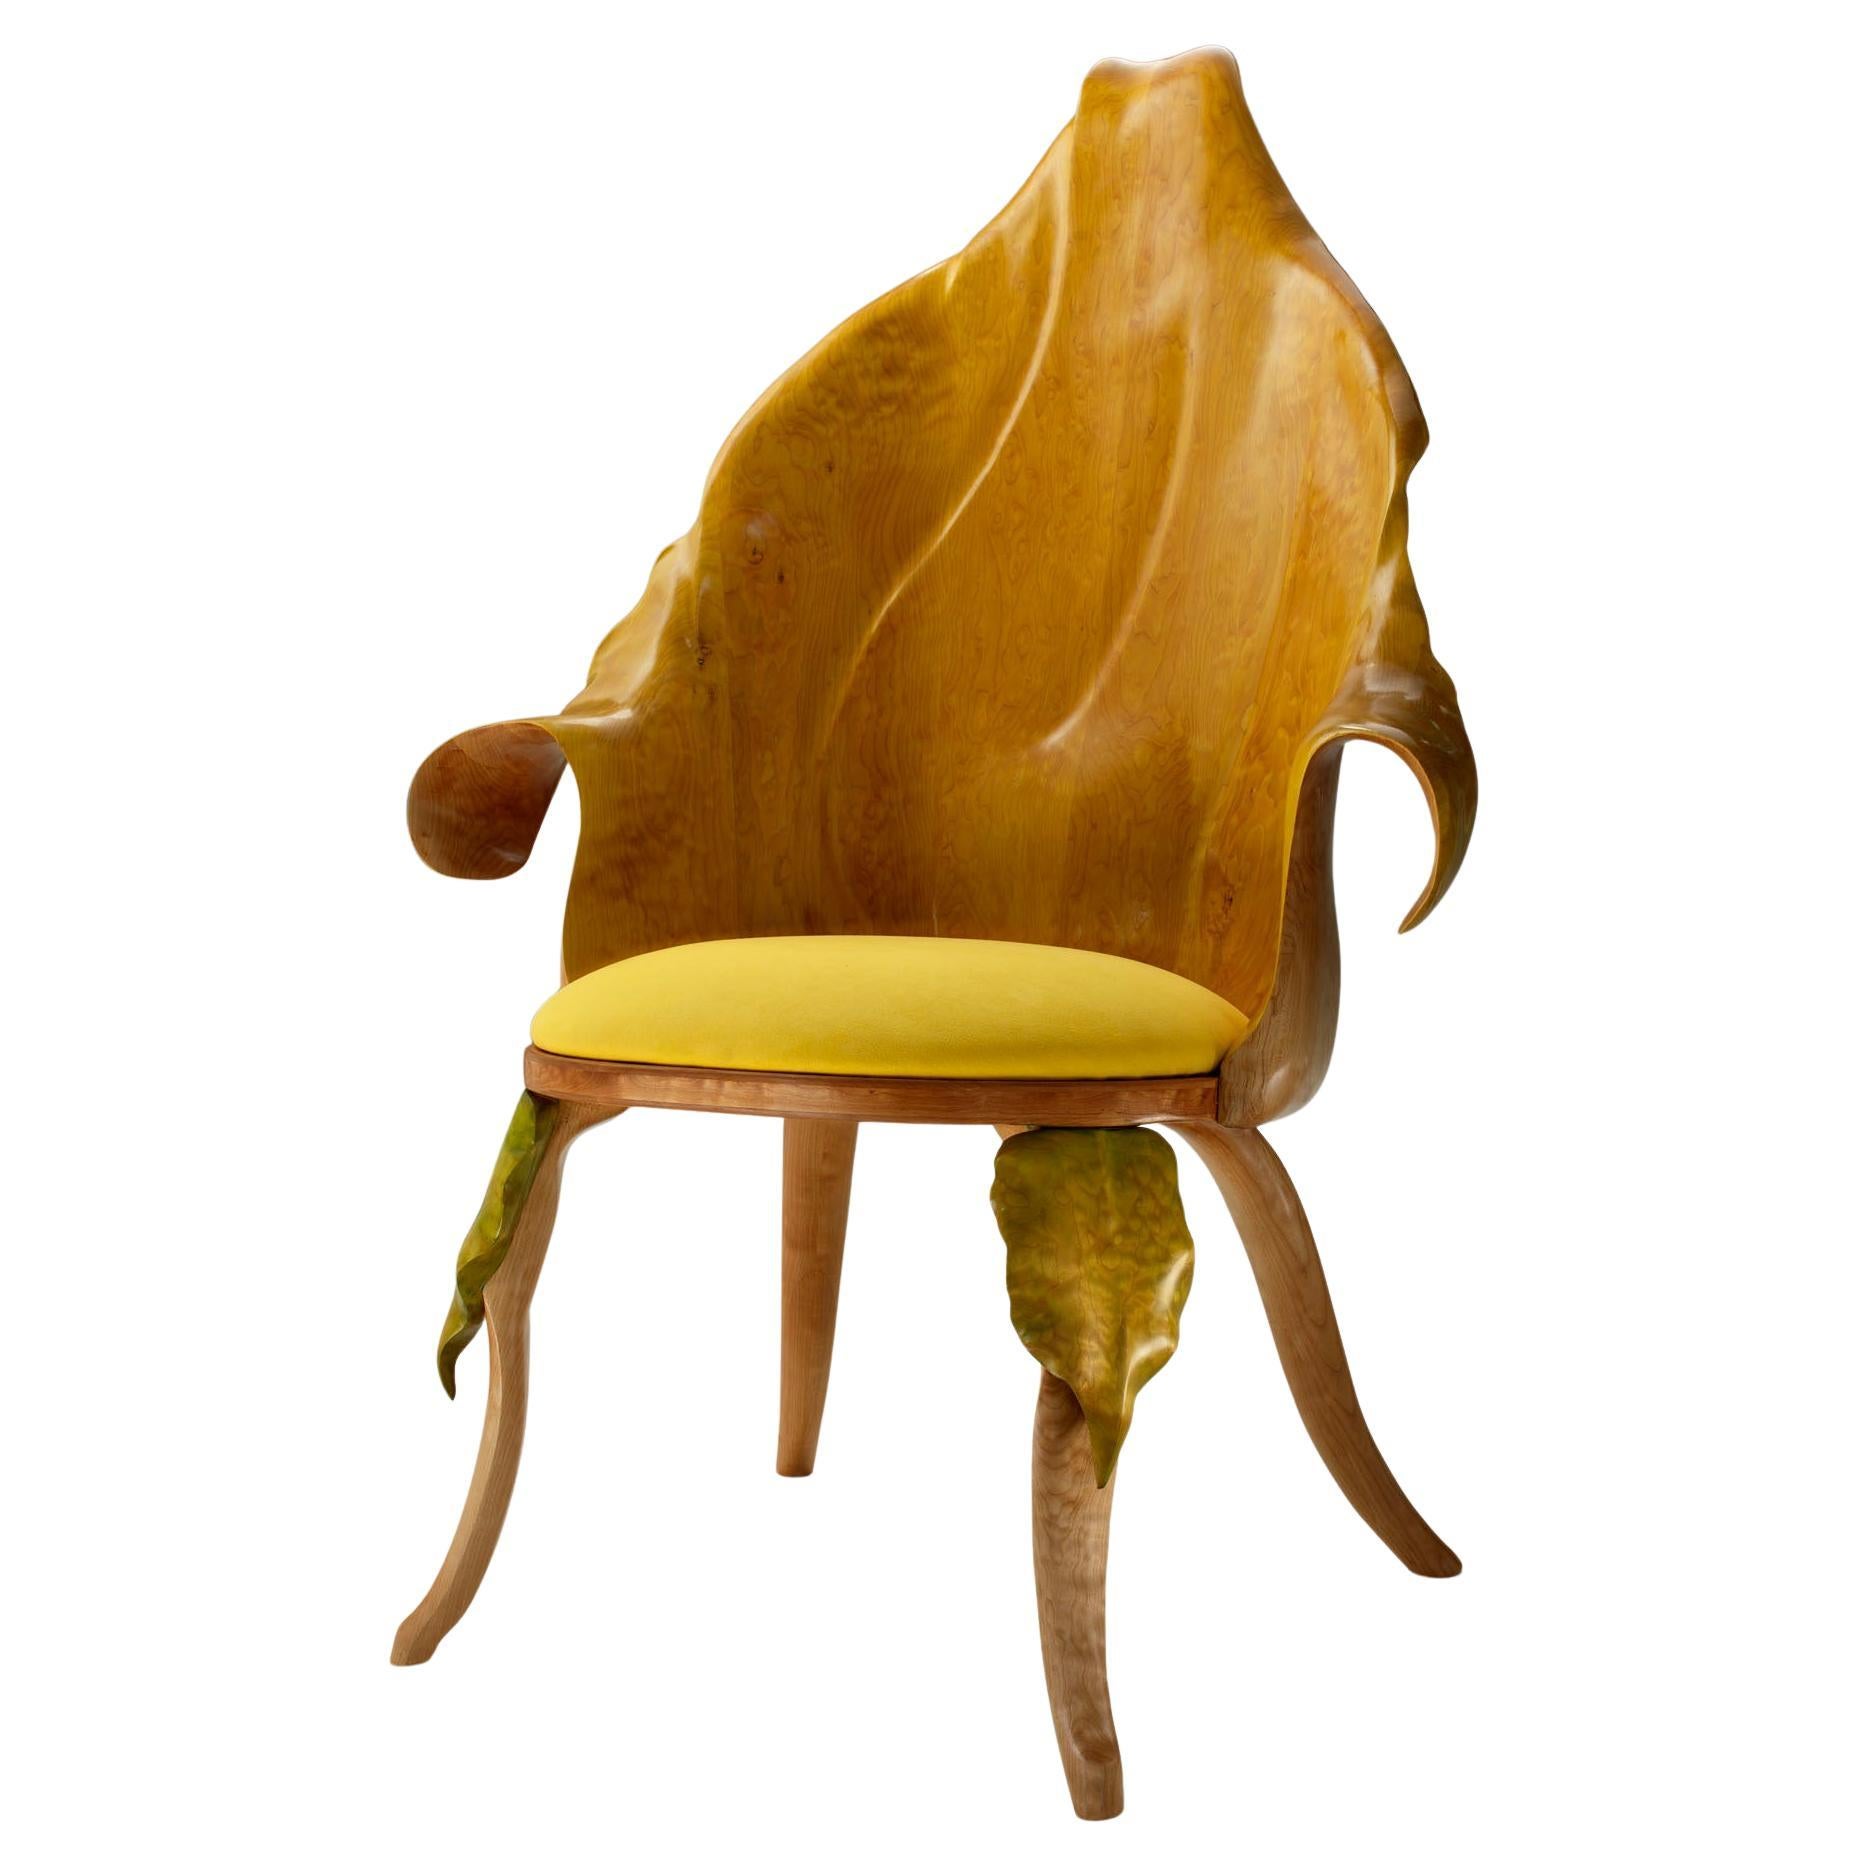 Yellow Calla Lily Chair Made of Curly Maple, Translucent Stains and Ultra-Suede